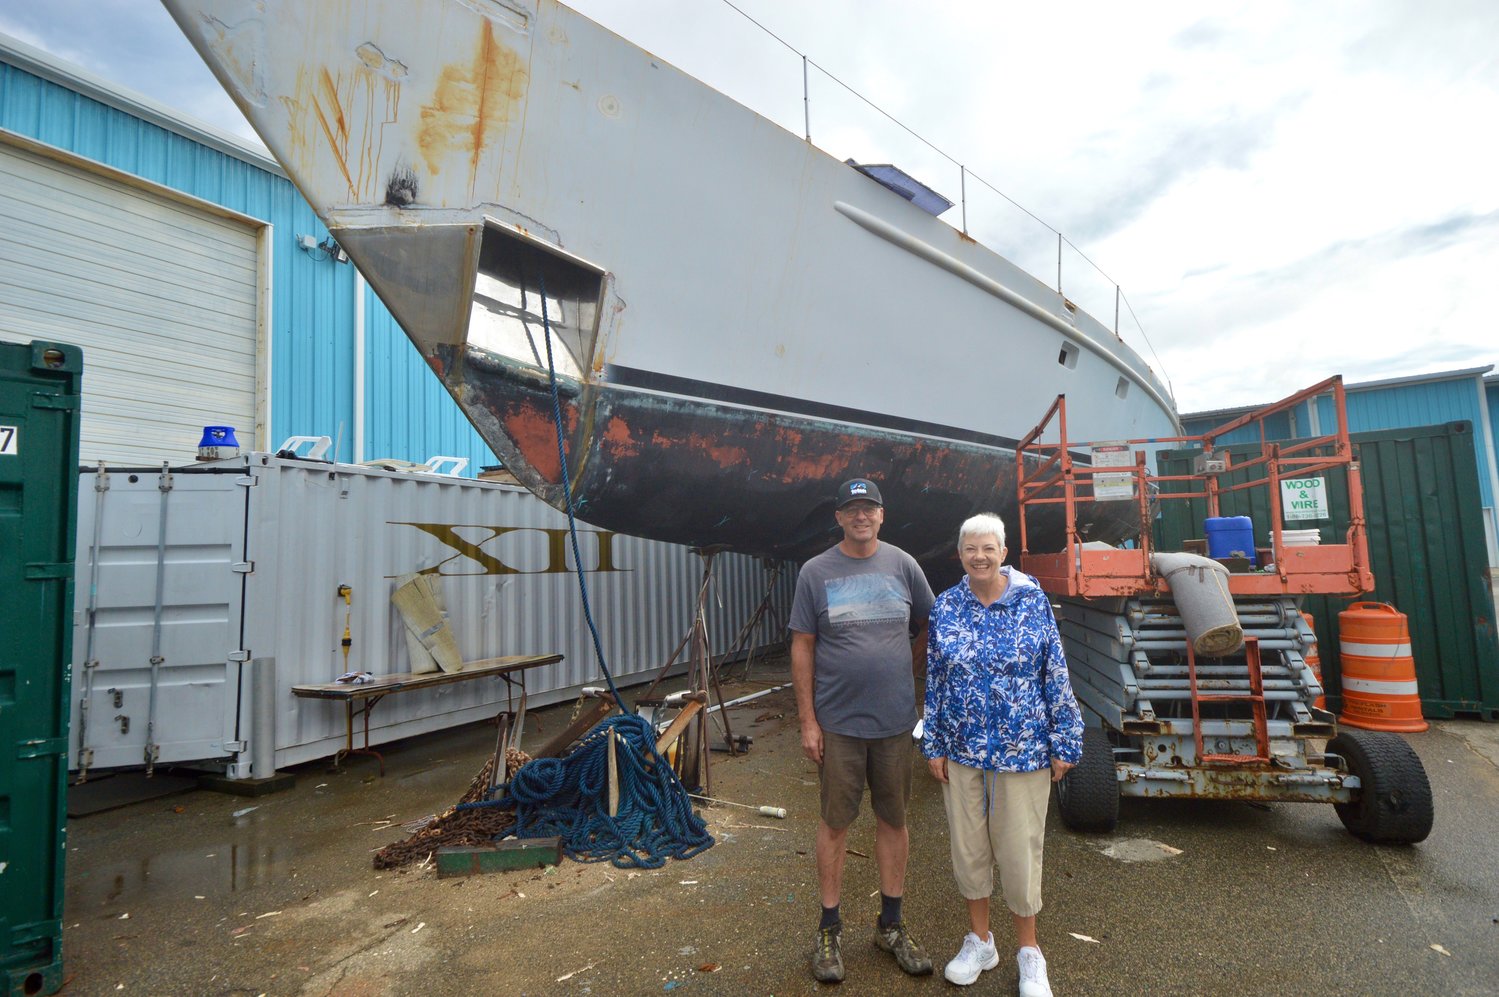 Standing in front of Pacific Star at the Hinckley Boat Yard last week are its owner, Ty Fields, and Capt. Ann Ford of Youth With a Mission (YWAM).